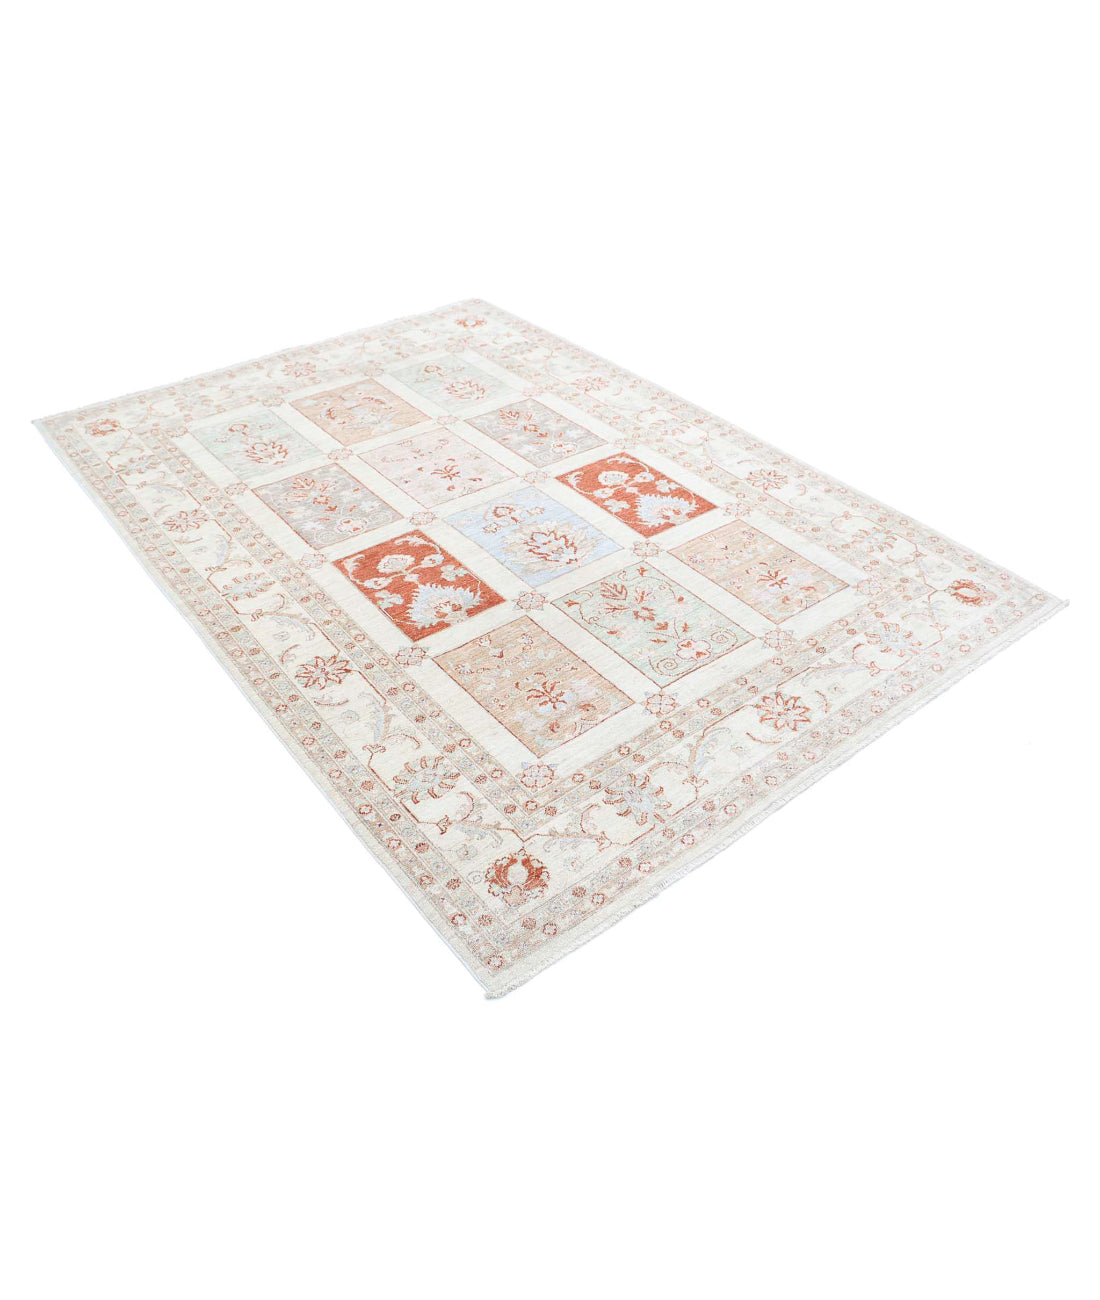 Serenity 5'6'' X 7'7'' Hand-Knotted Wool Rug 5'6'' x 7'7'' (165 X 228) / Ivory / Red